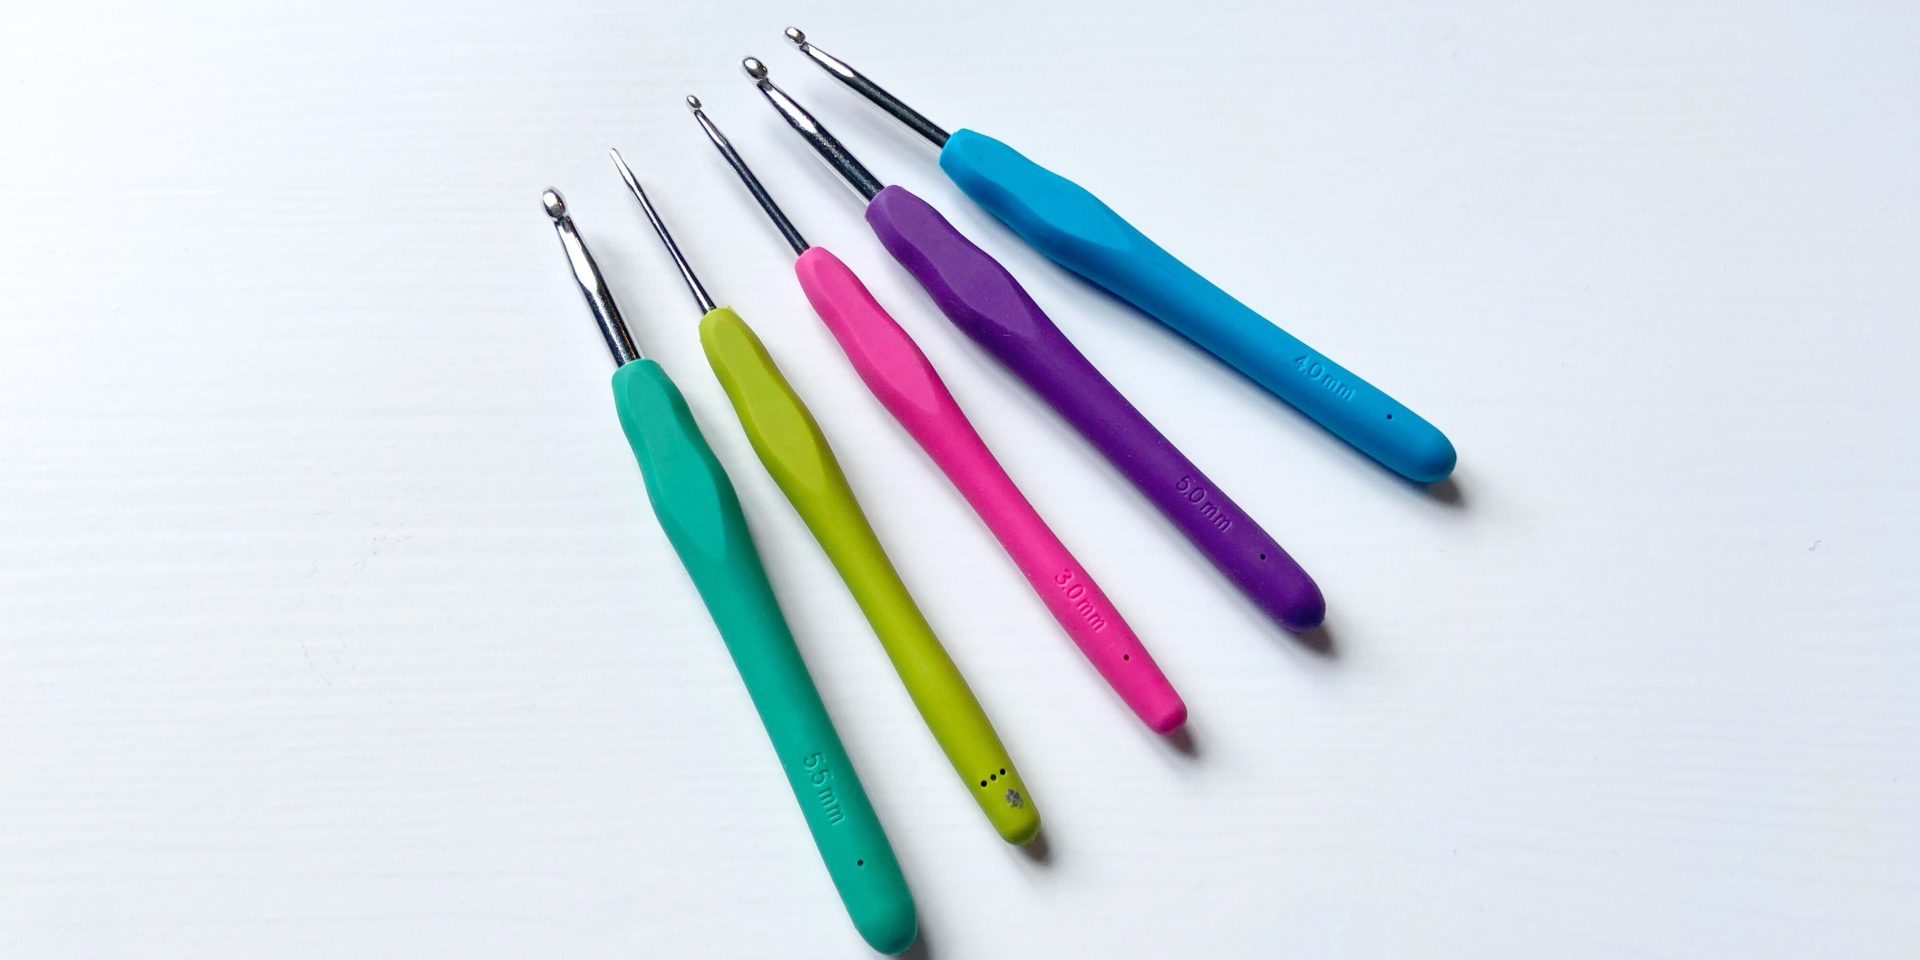 Shop Long Crochet Hook with great discounts and prices online - Oct 2023